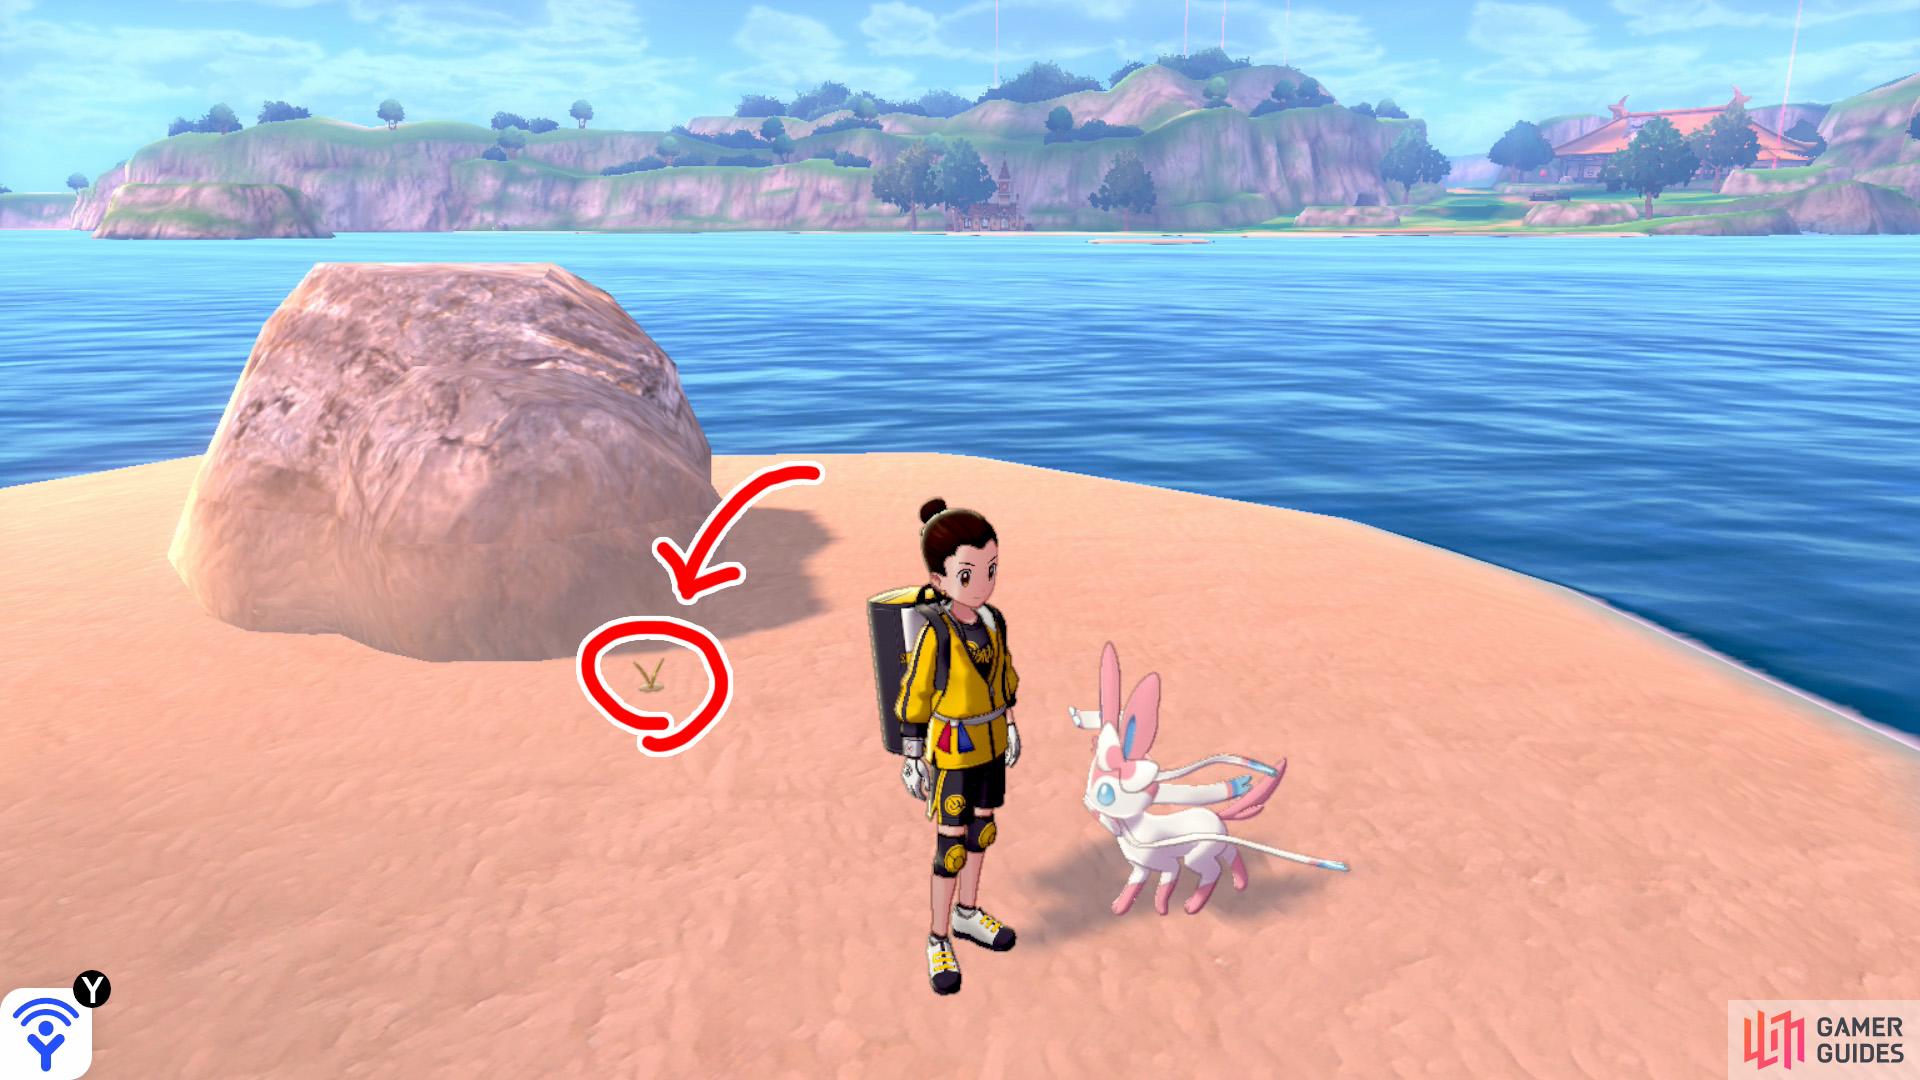 7/11: From Diglett 6, continue swimming straight ahead (with the mainland on your right). After a while, you should reach a Pokémon Den, then another islet with a rock in the centre. Guess who's in front of the rock?